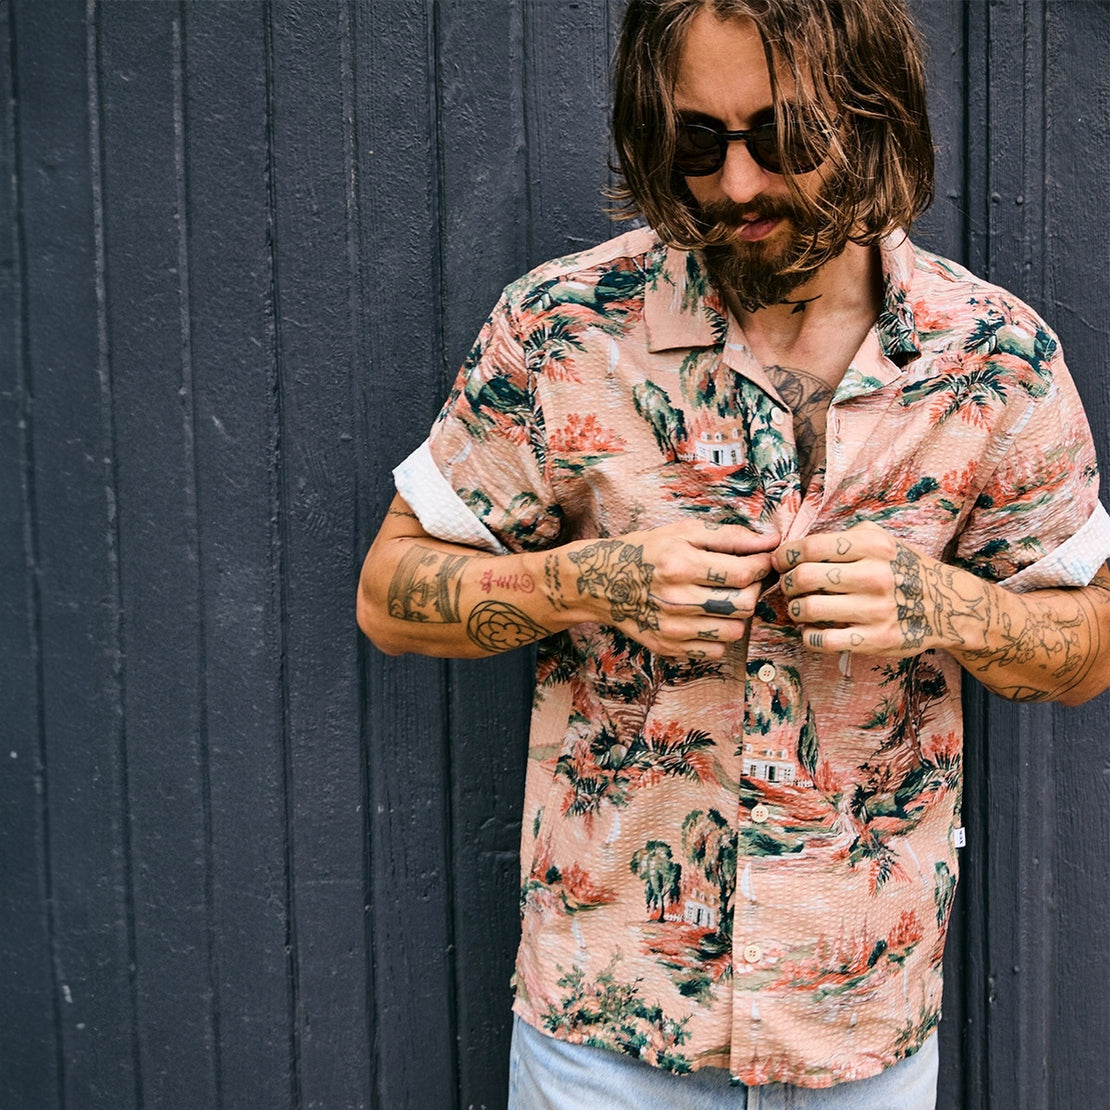 Didcot Scenic Shirt - Pink - Wax London - STAG Provisions - Tops - S/S Woven - Seersucker